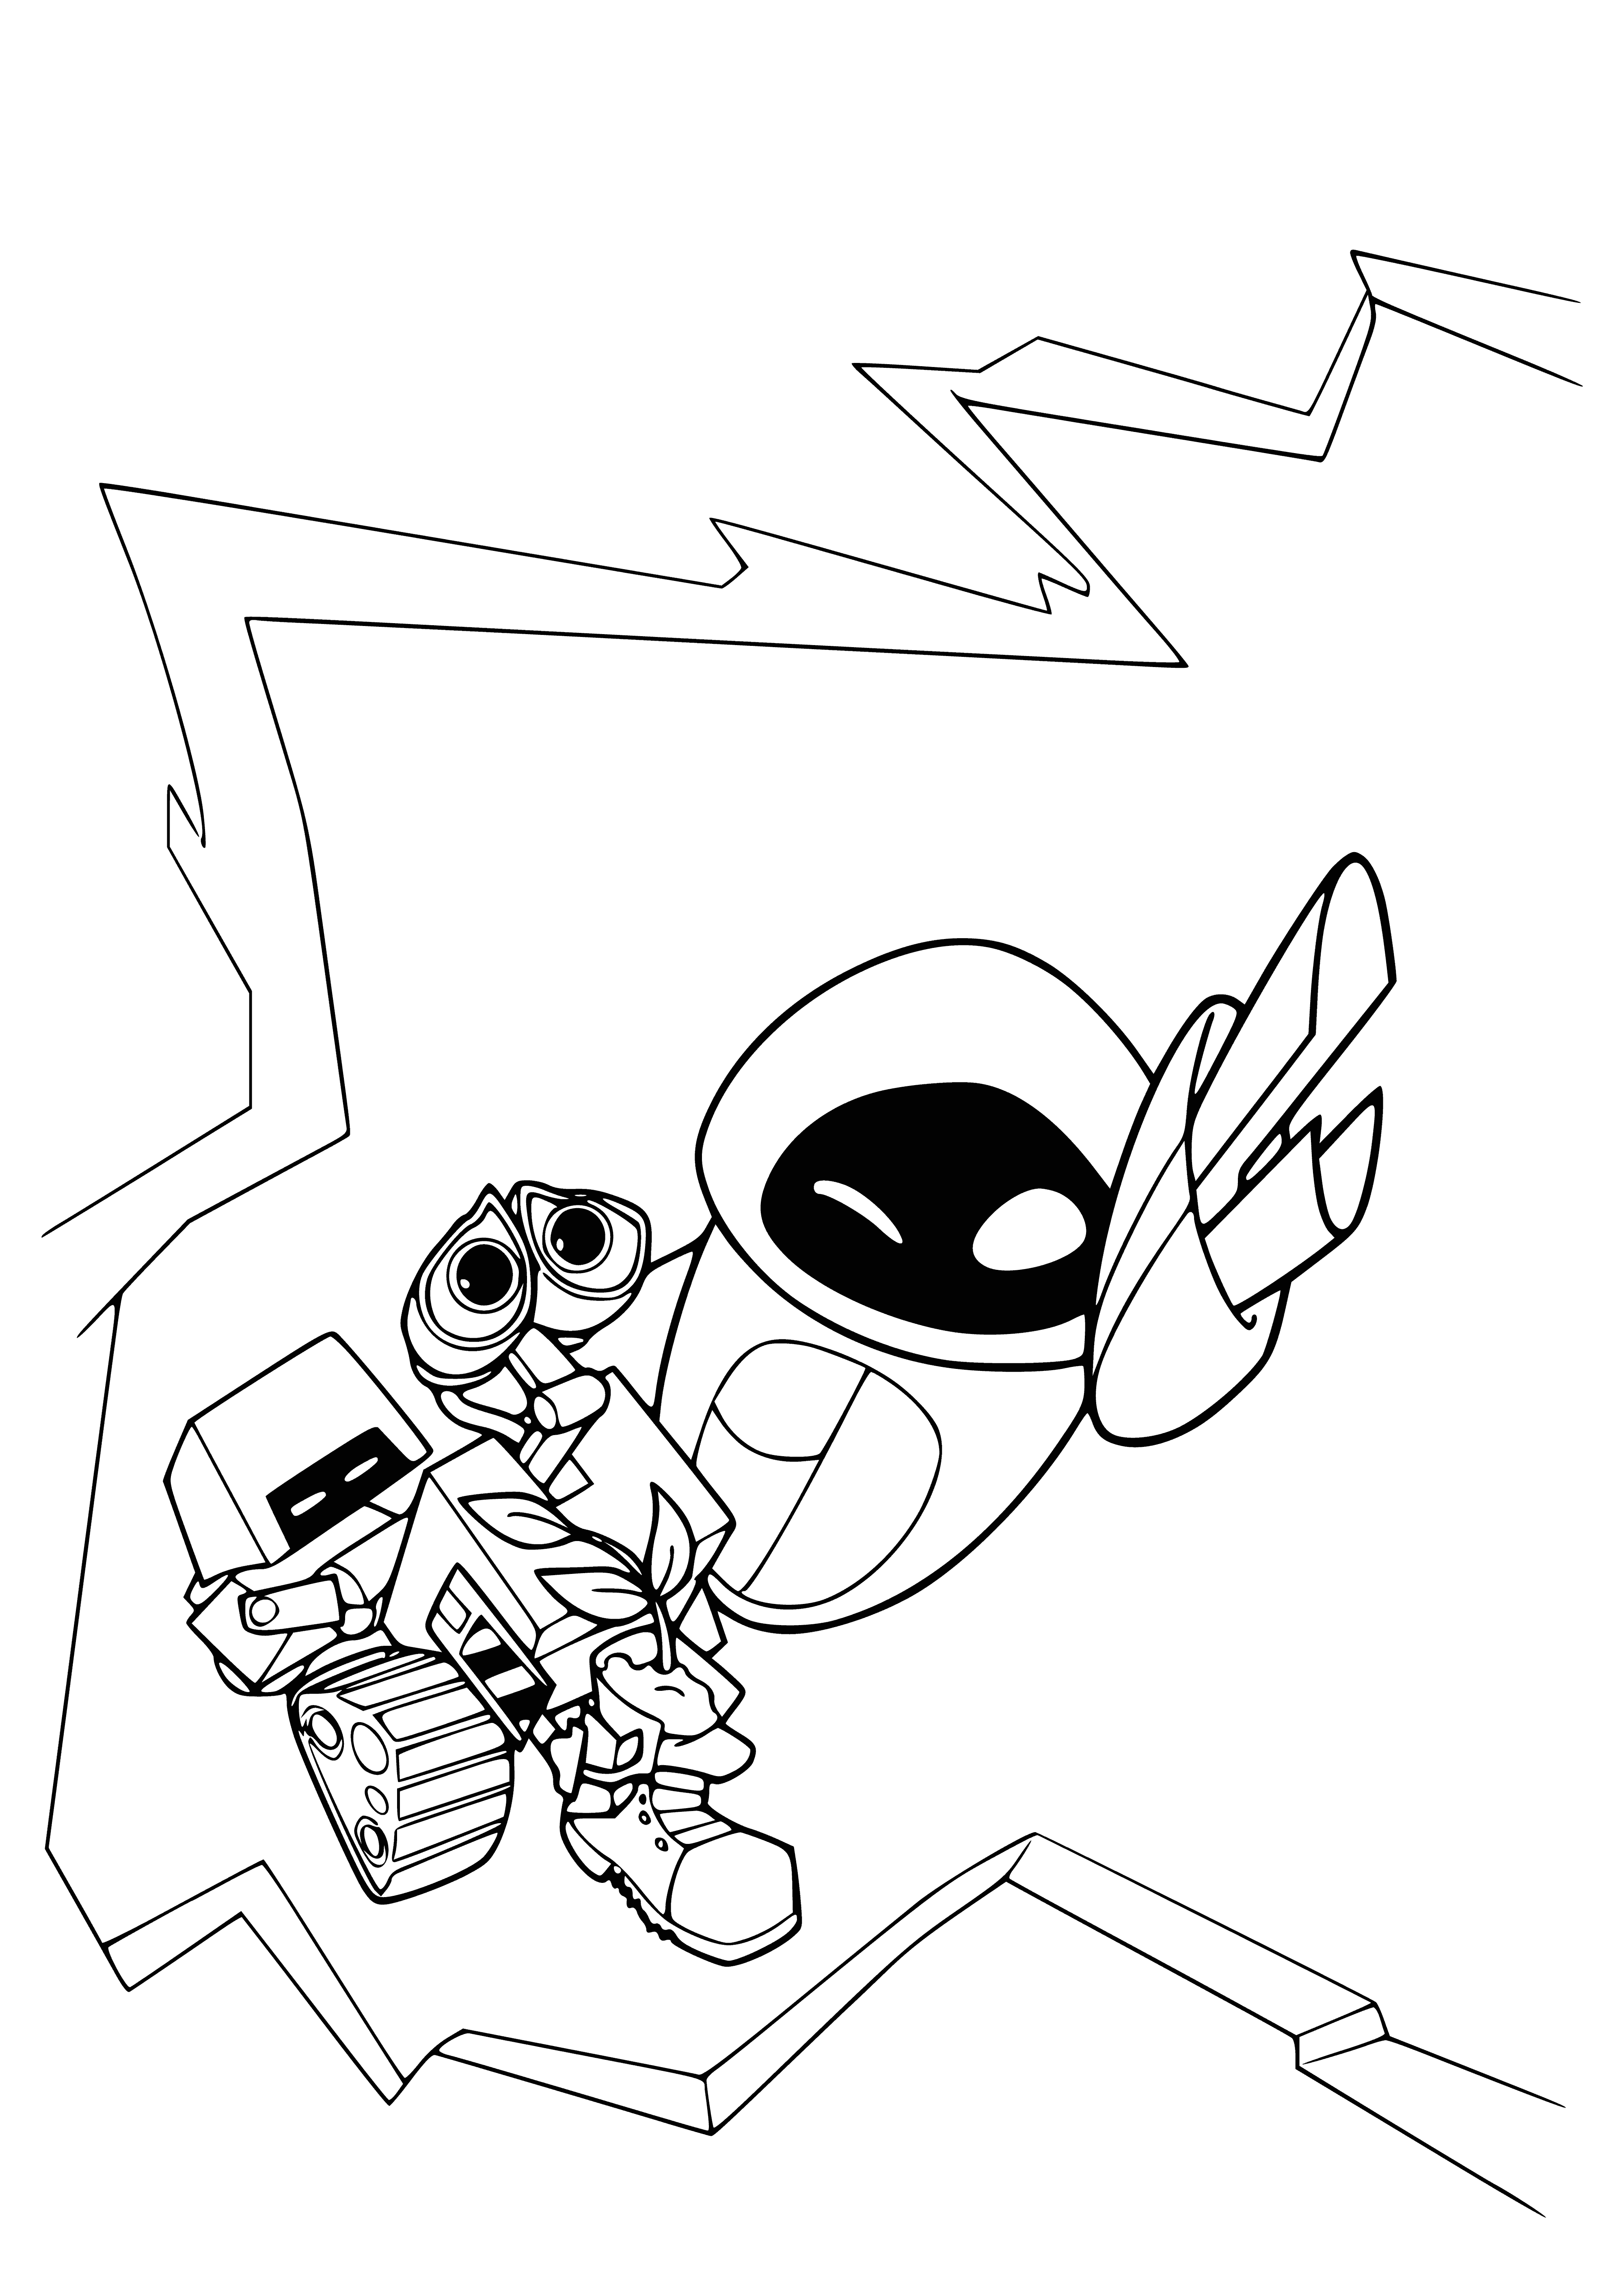 Eve and Wally coloring page